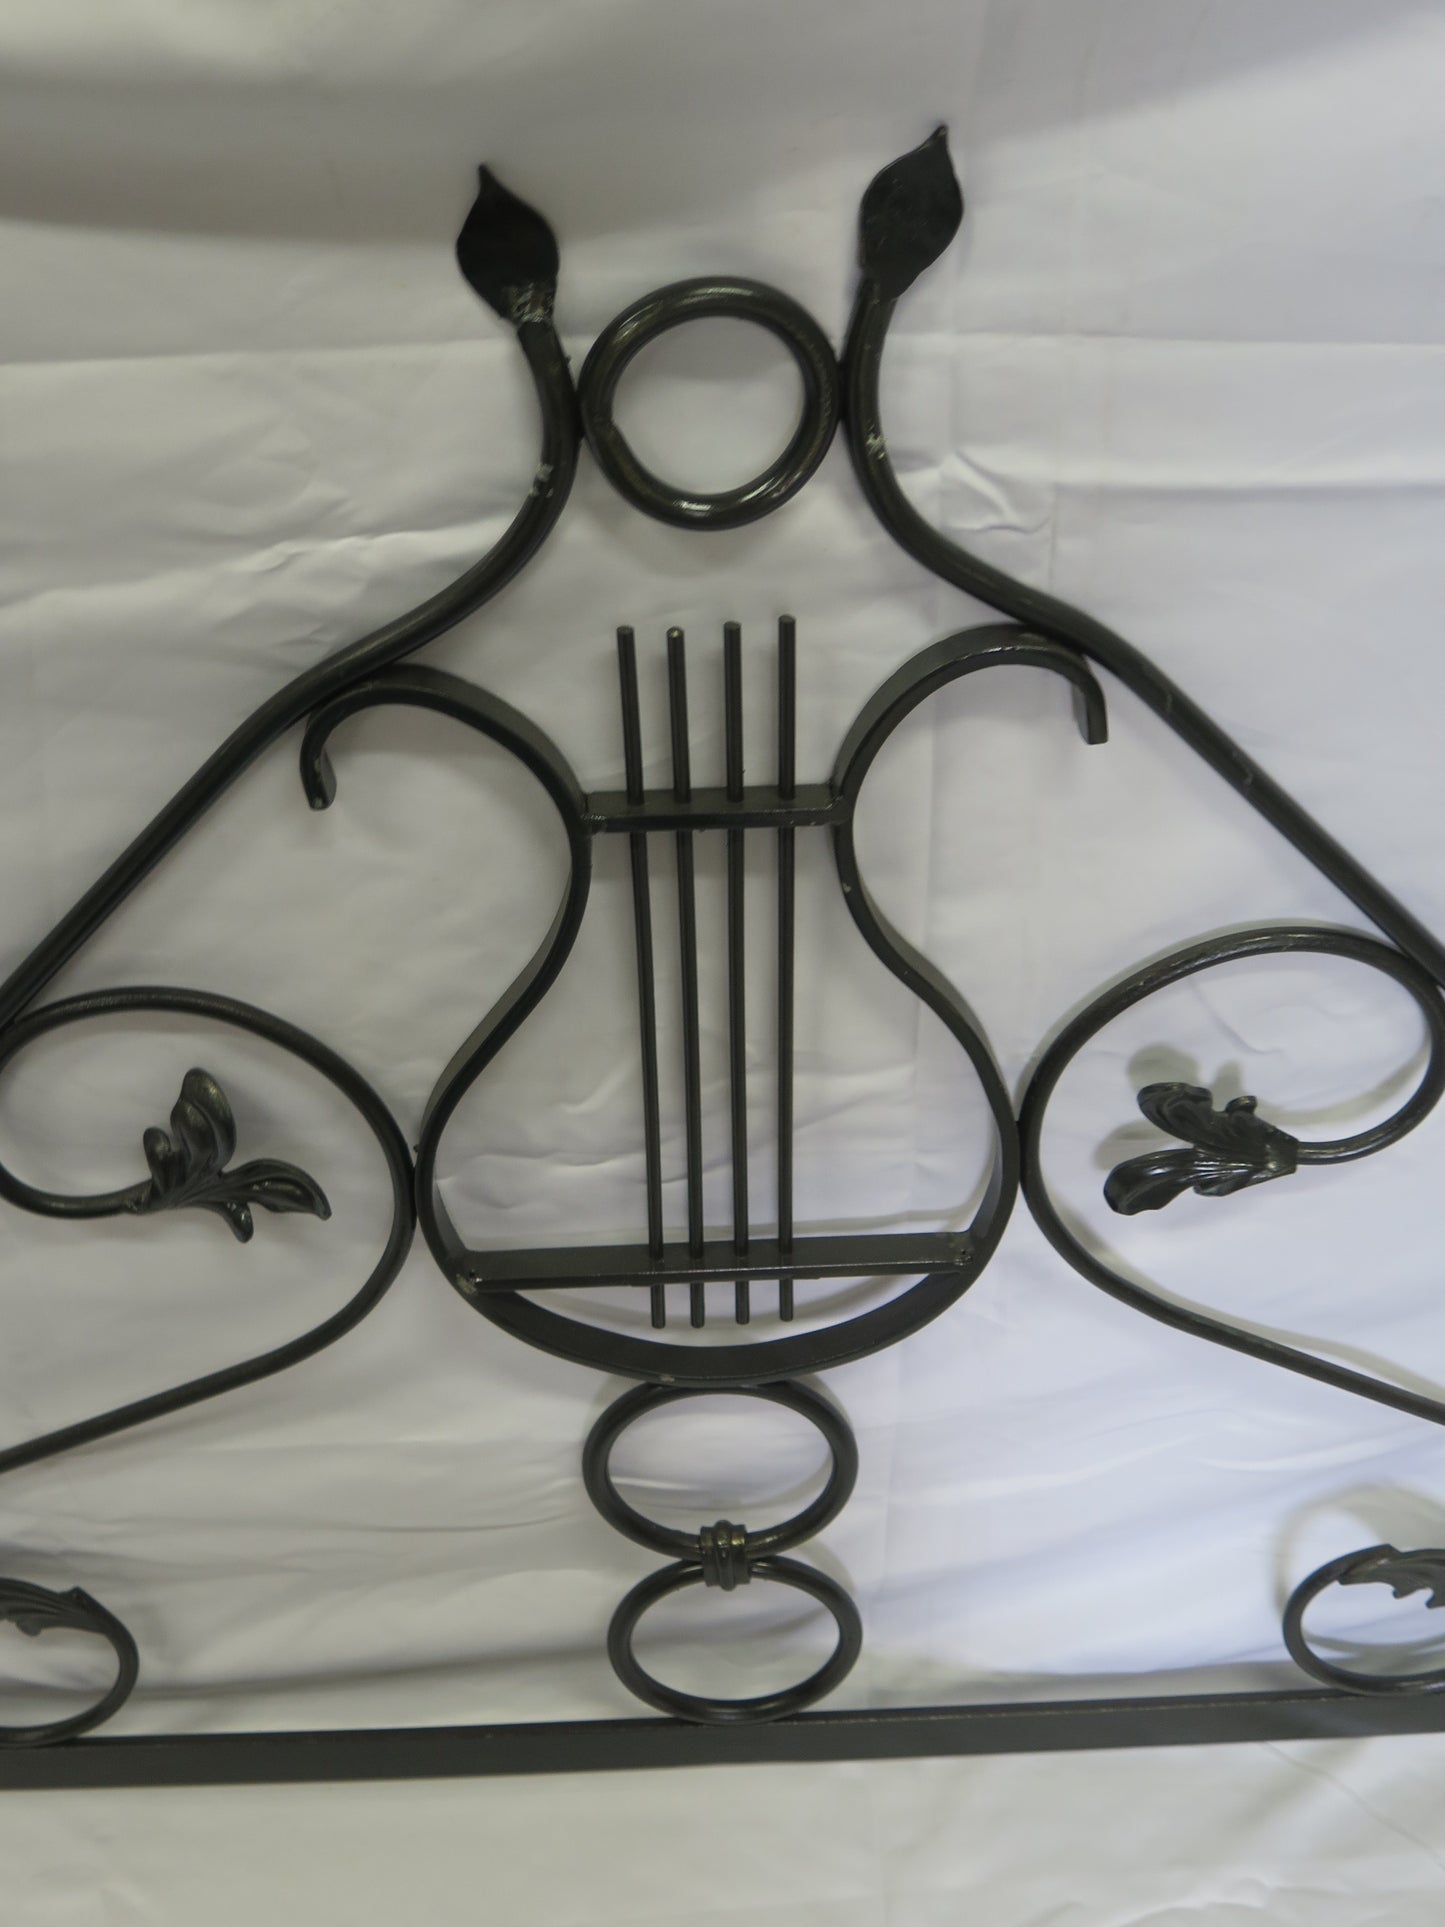 HEADBOARD IN HAND FORGED WROUGHT IRON VINTAGE DOUBLE BED 44 CH